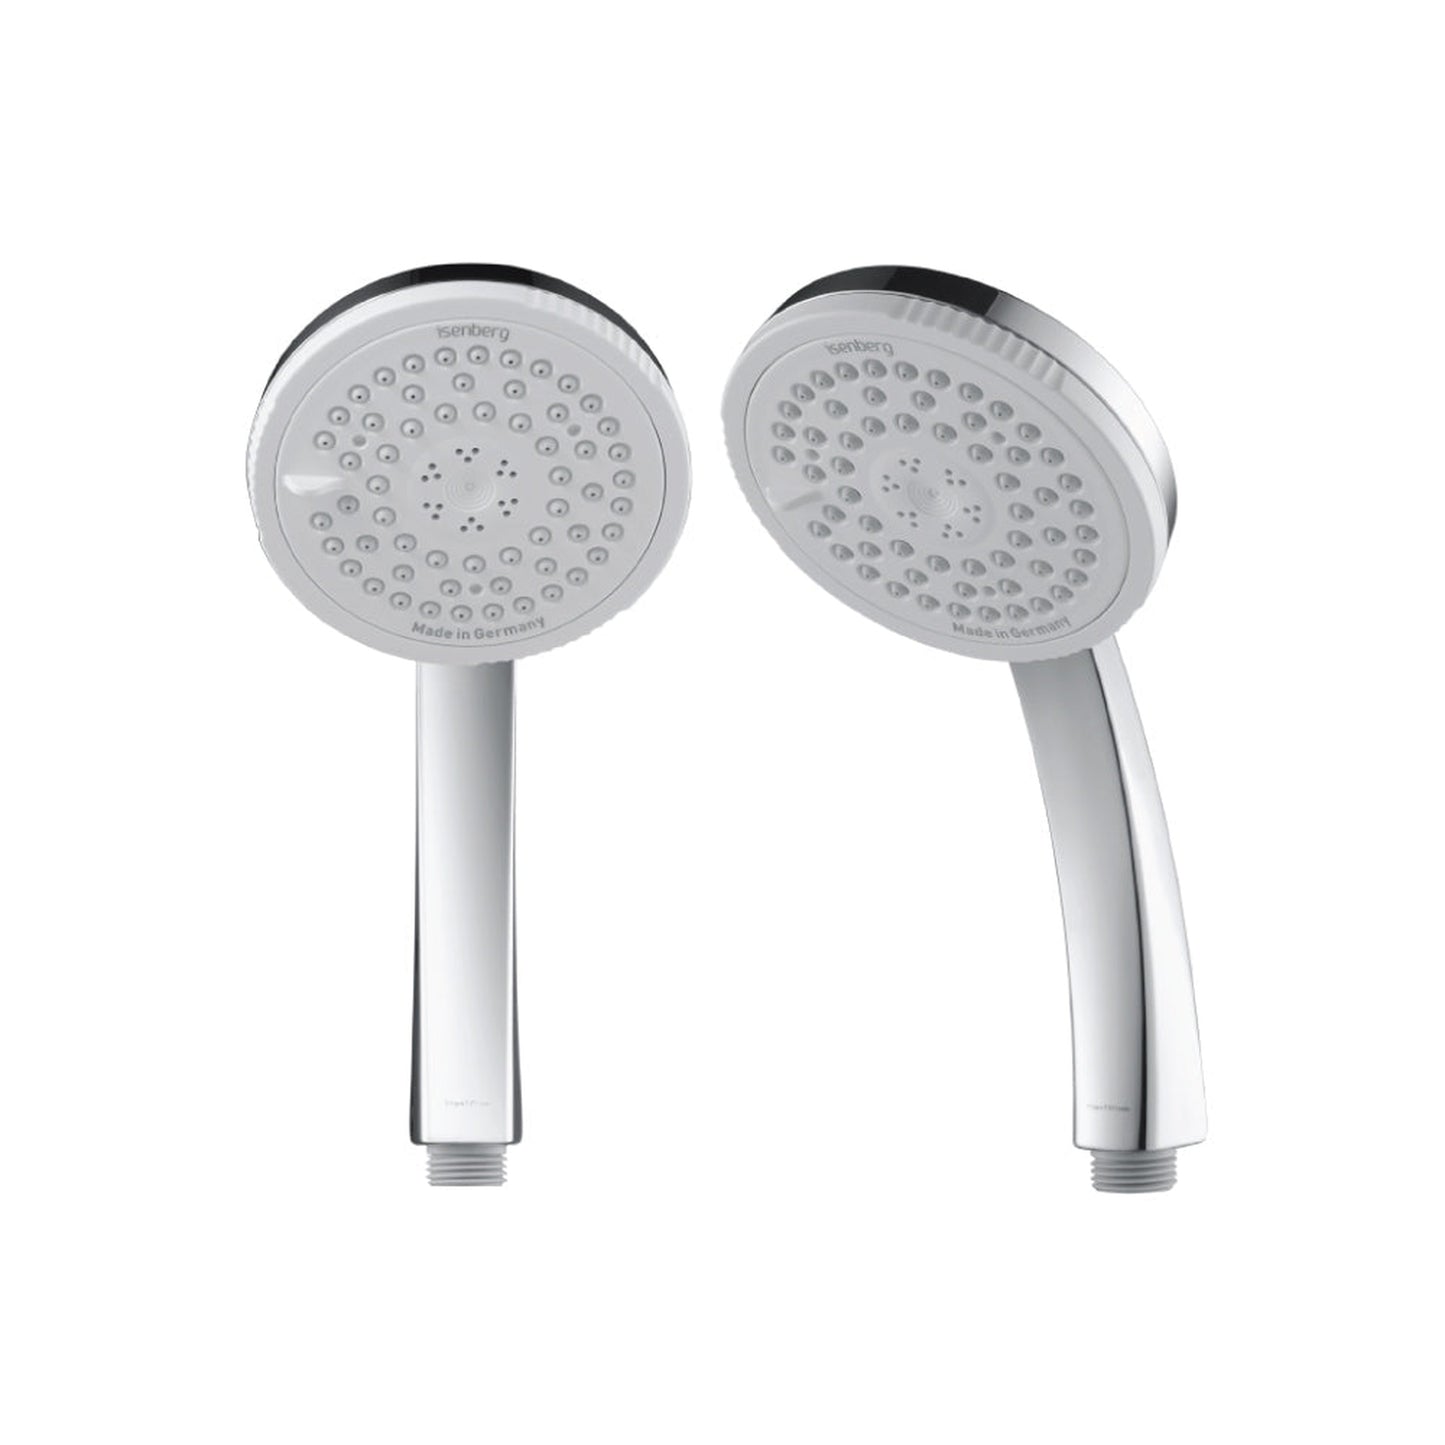 Isenberg Universal Fixtures Multi-Function ABS Hand Held Shower Head in Chrome (HS6150CP)